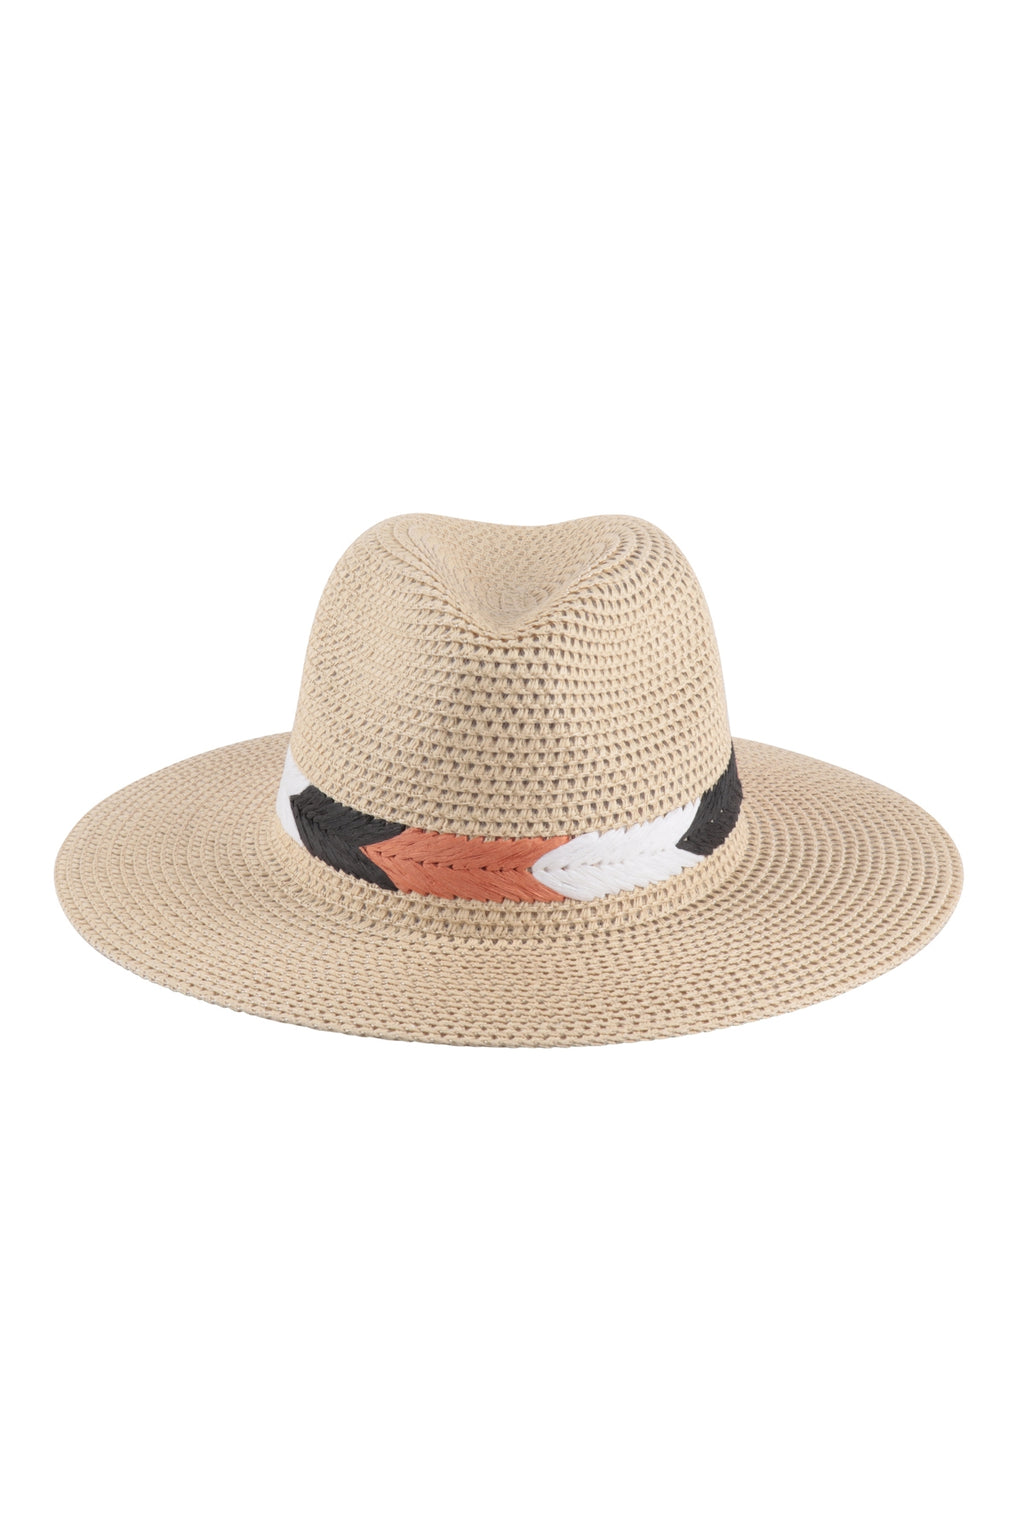 Panama Brim Summer Hat with Braided Stripe Accent Ivory - Pack of 6